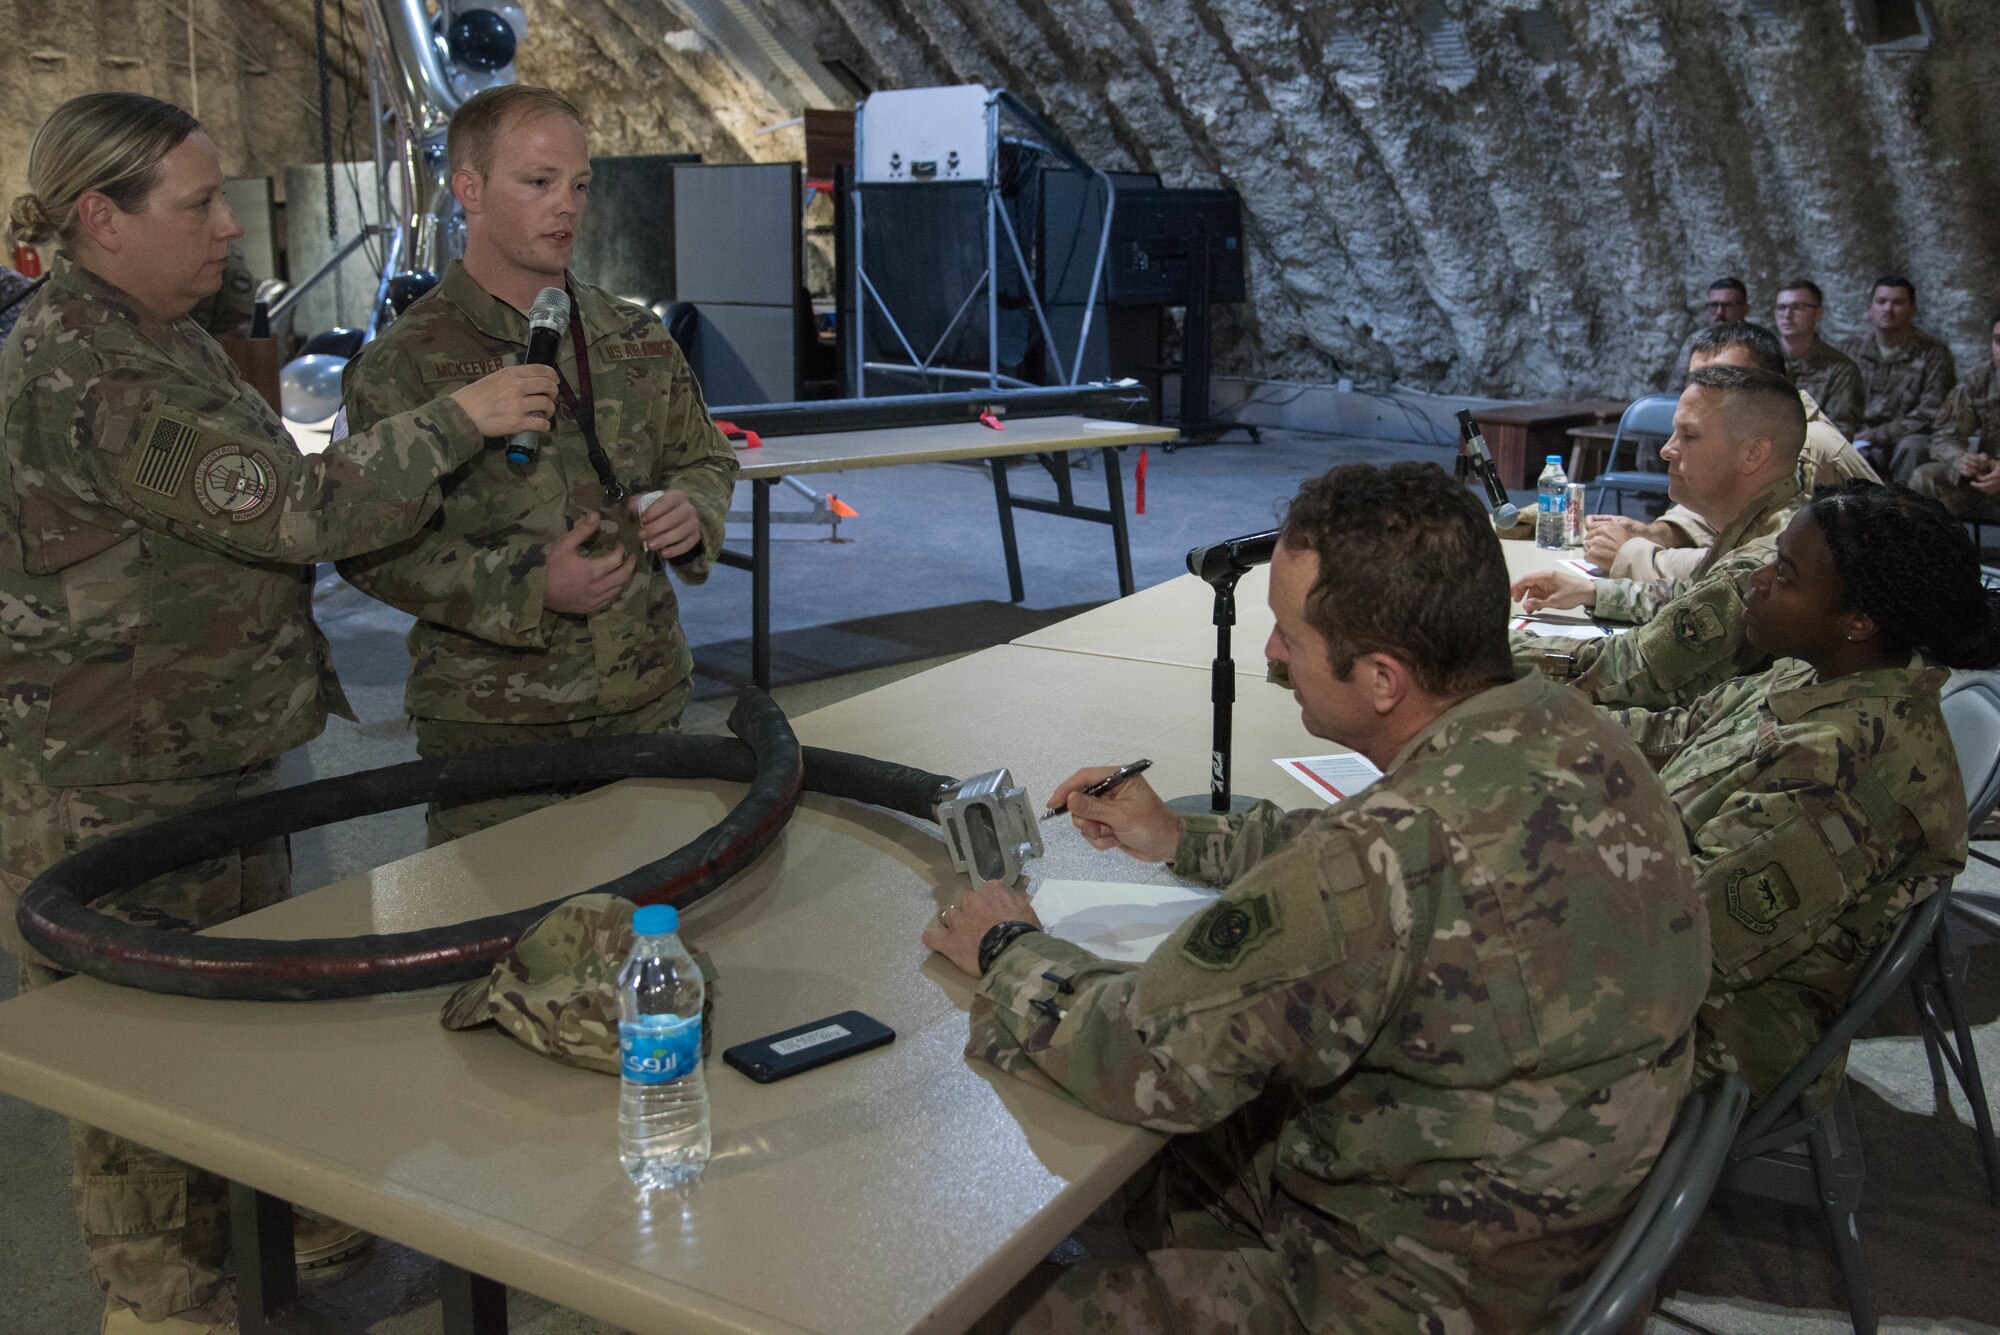 Staff Sgt. Devin McKeever, 332nd Expeditionary Maintenance Squadron fuel systems craftsman, answers questions about his idea for the Red Tails Commander’s Innovation Challenge, Sept. 28, 2018, at an undisclosed location in Southwest Asia.